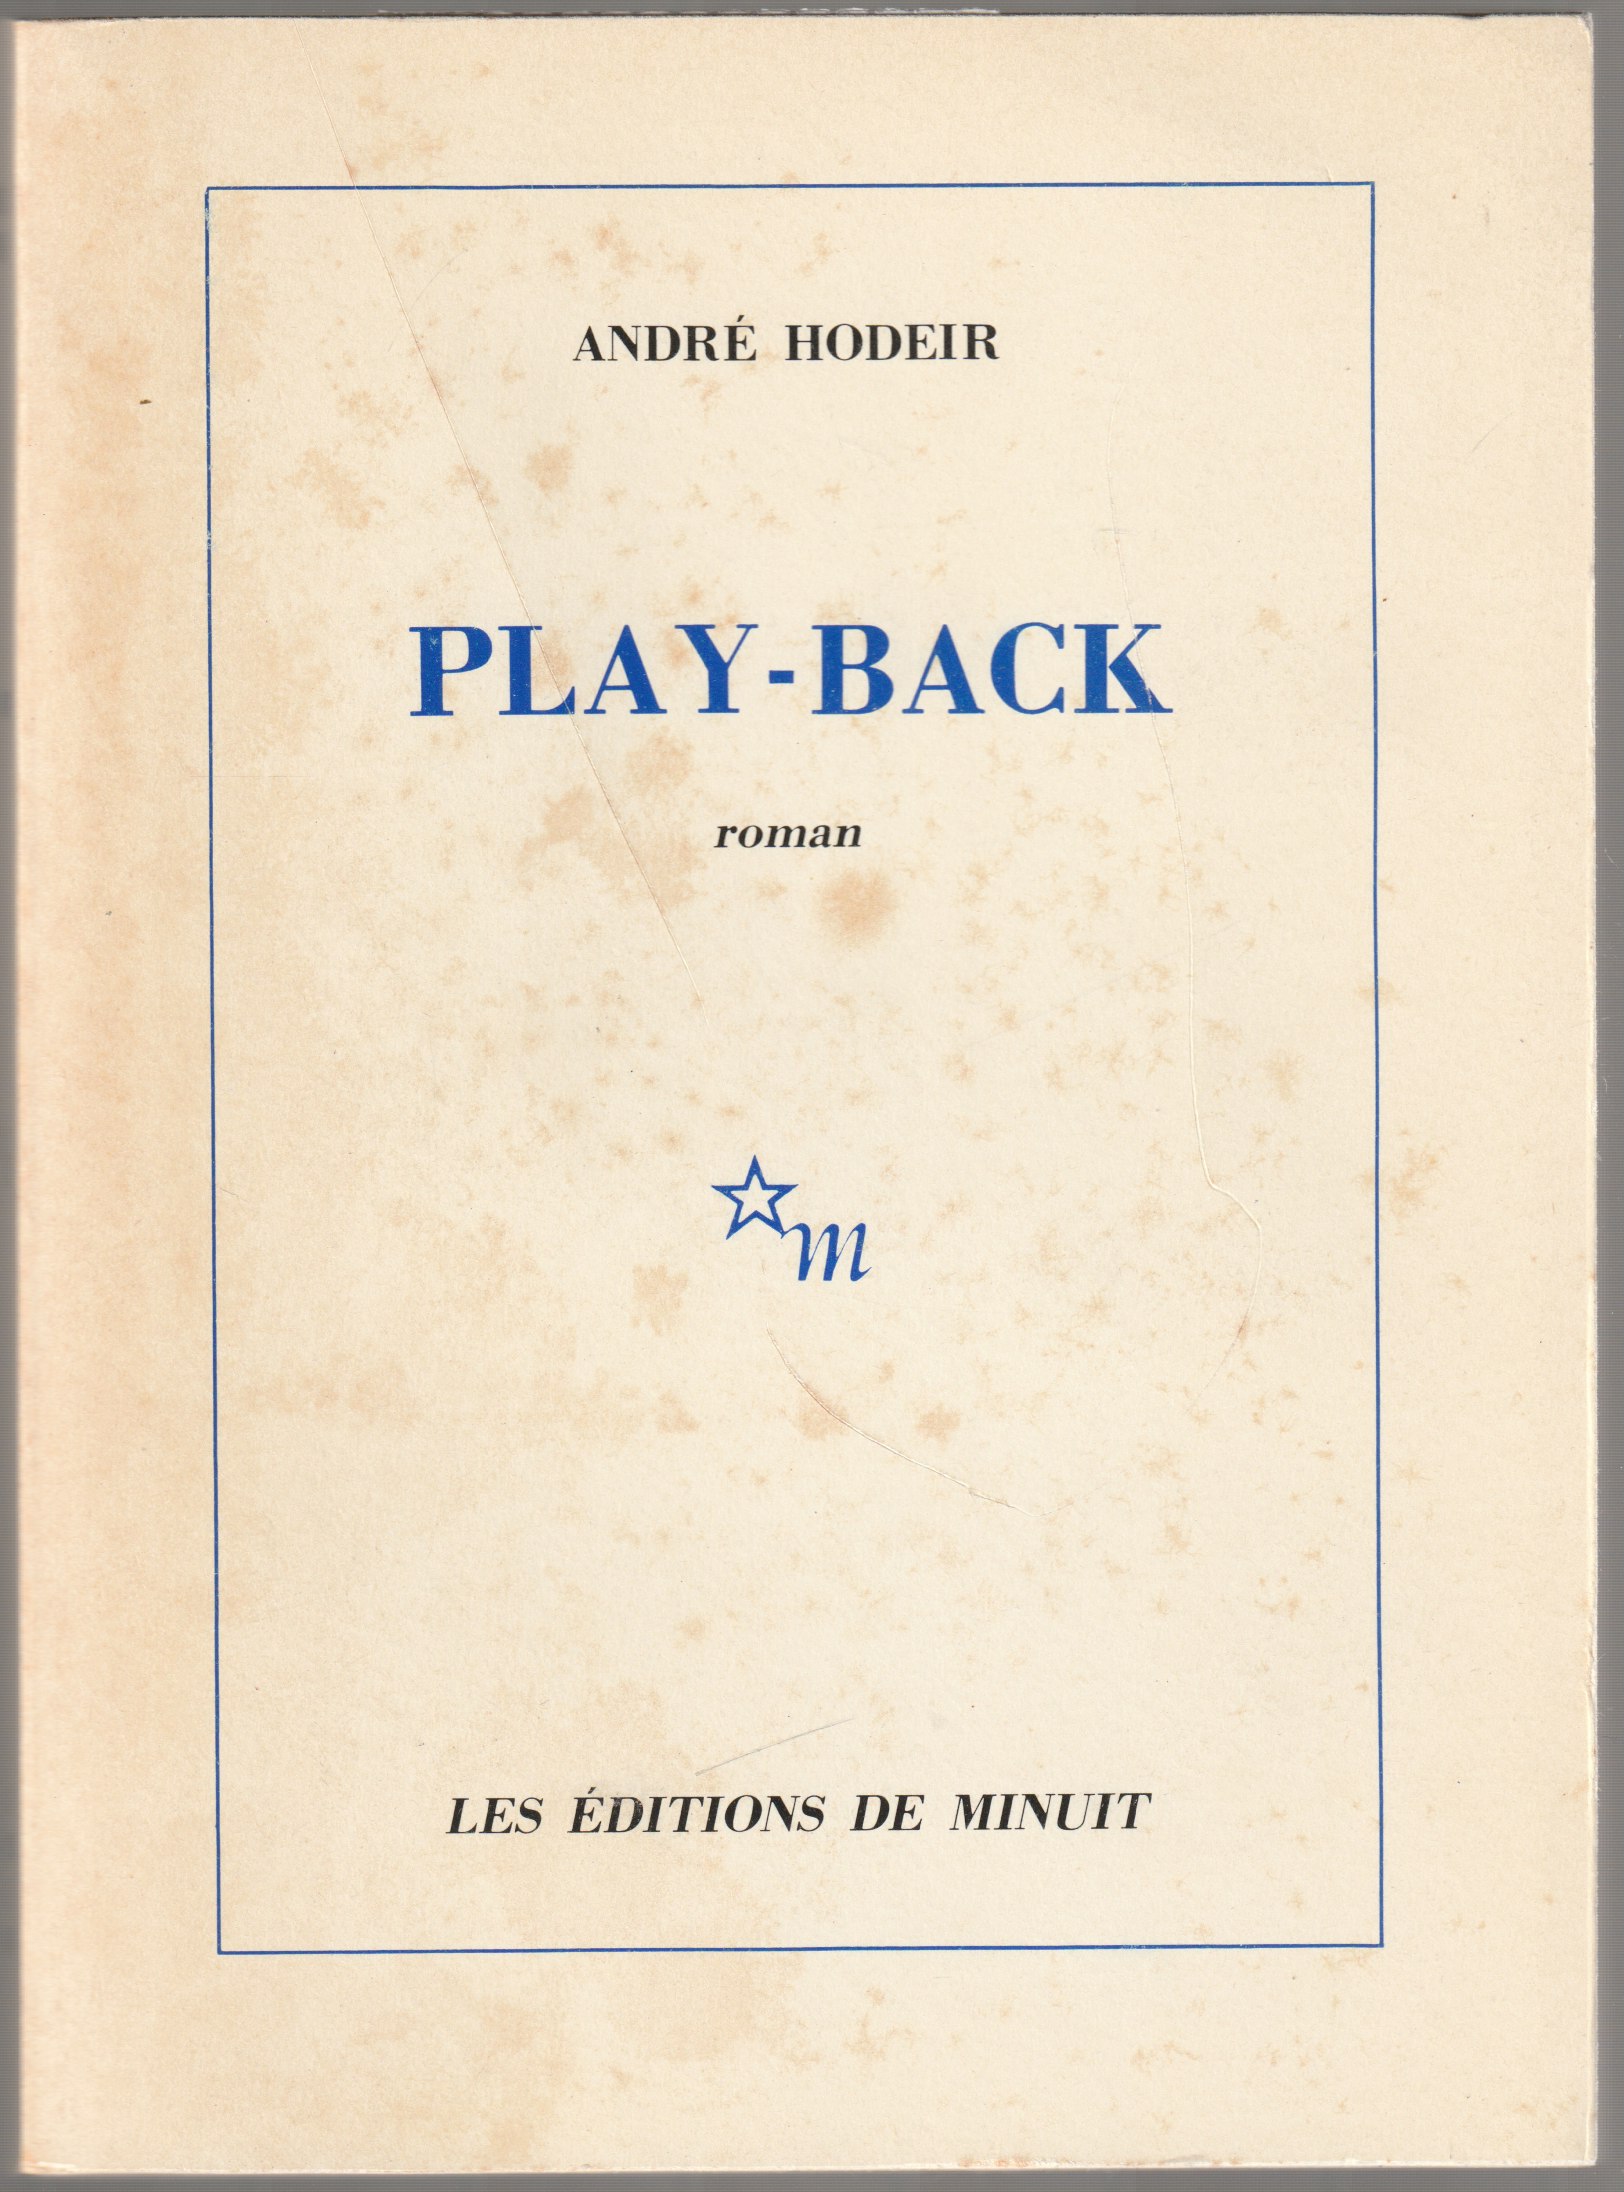 Play-back.